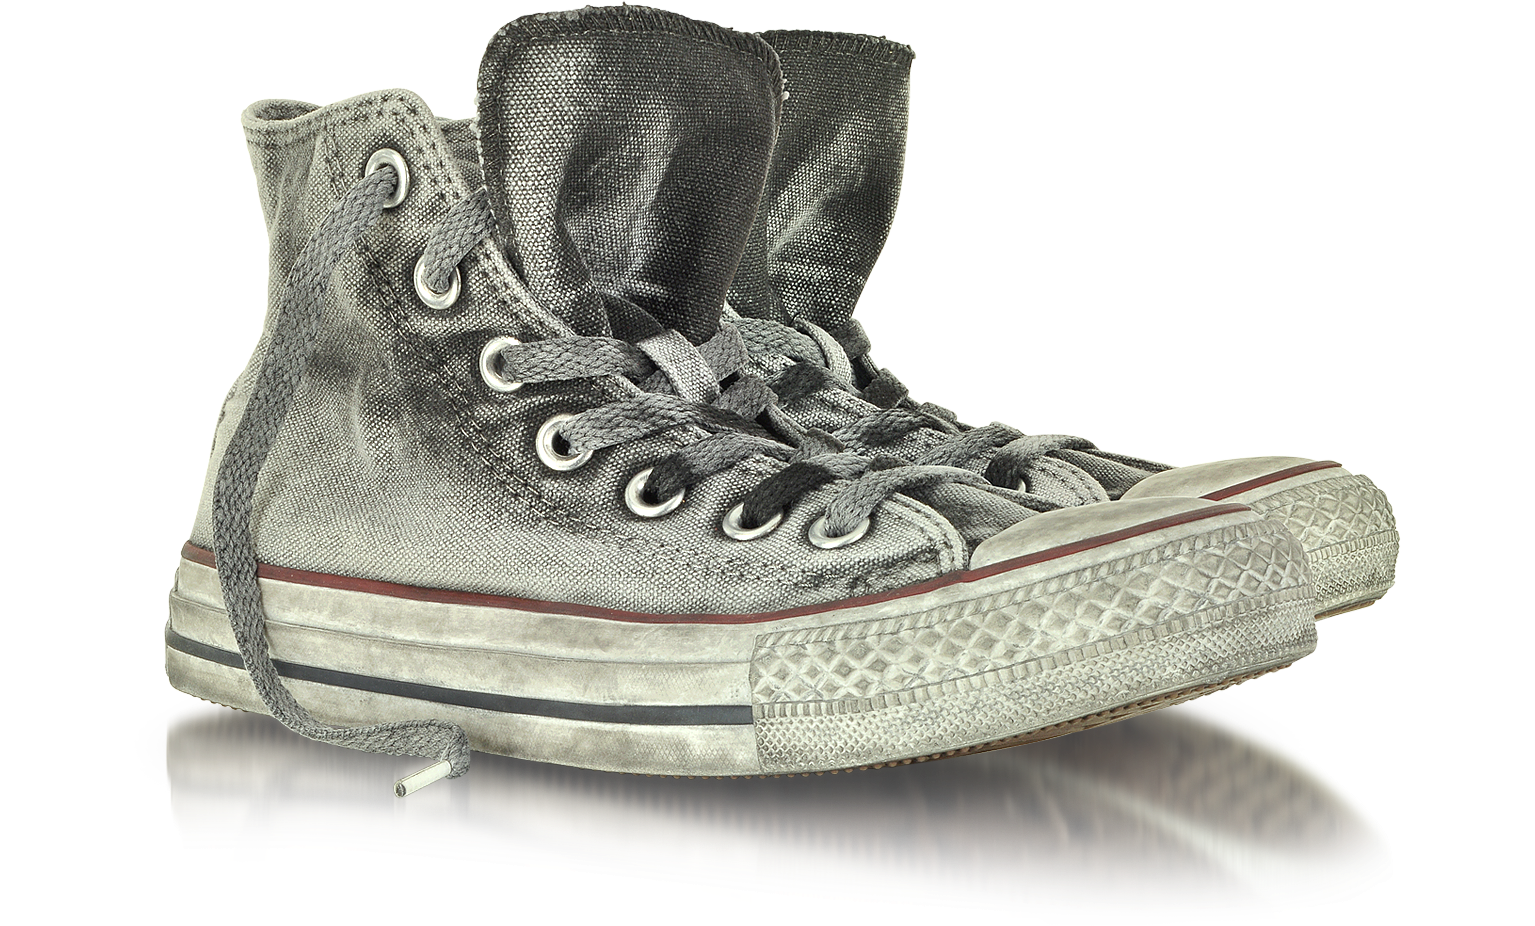 converse all star limited edition